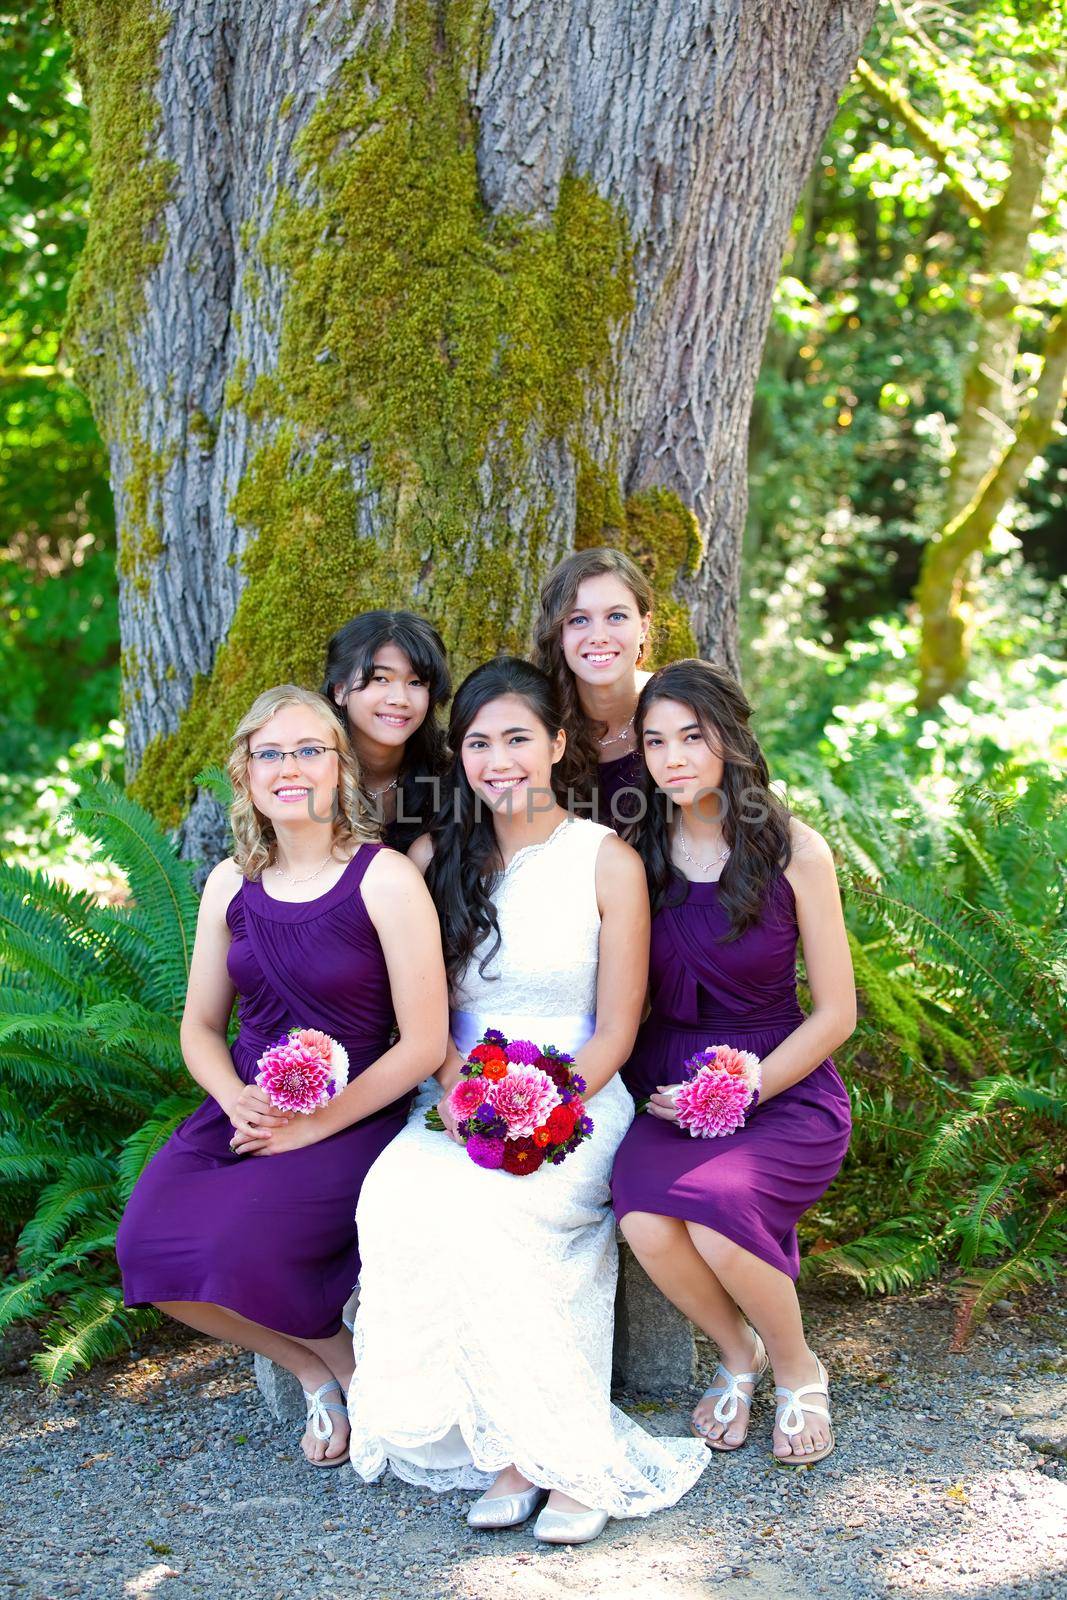 Beautiful biracial young bride smiling with her multiethnic group of bridesmaids by jarenwicklund